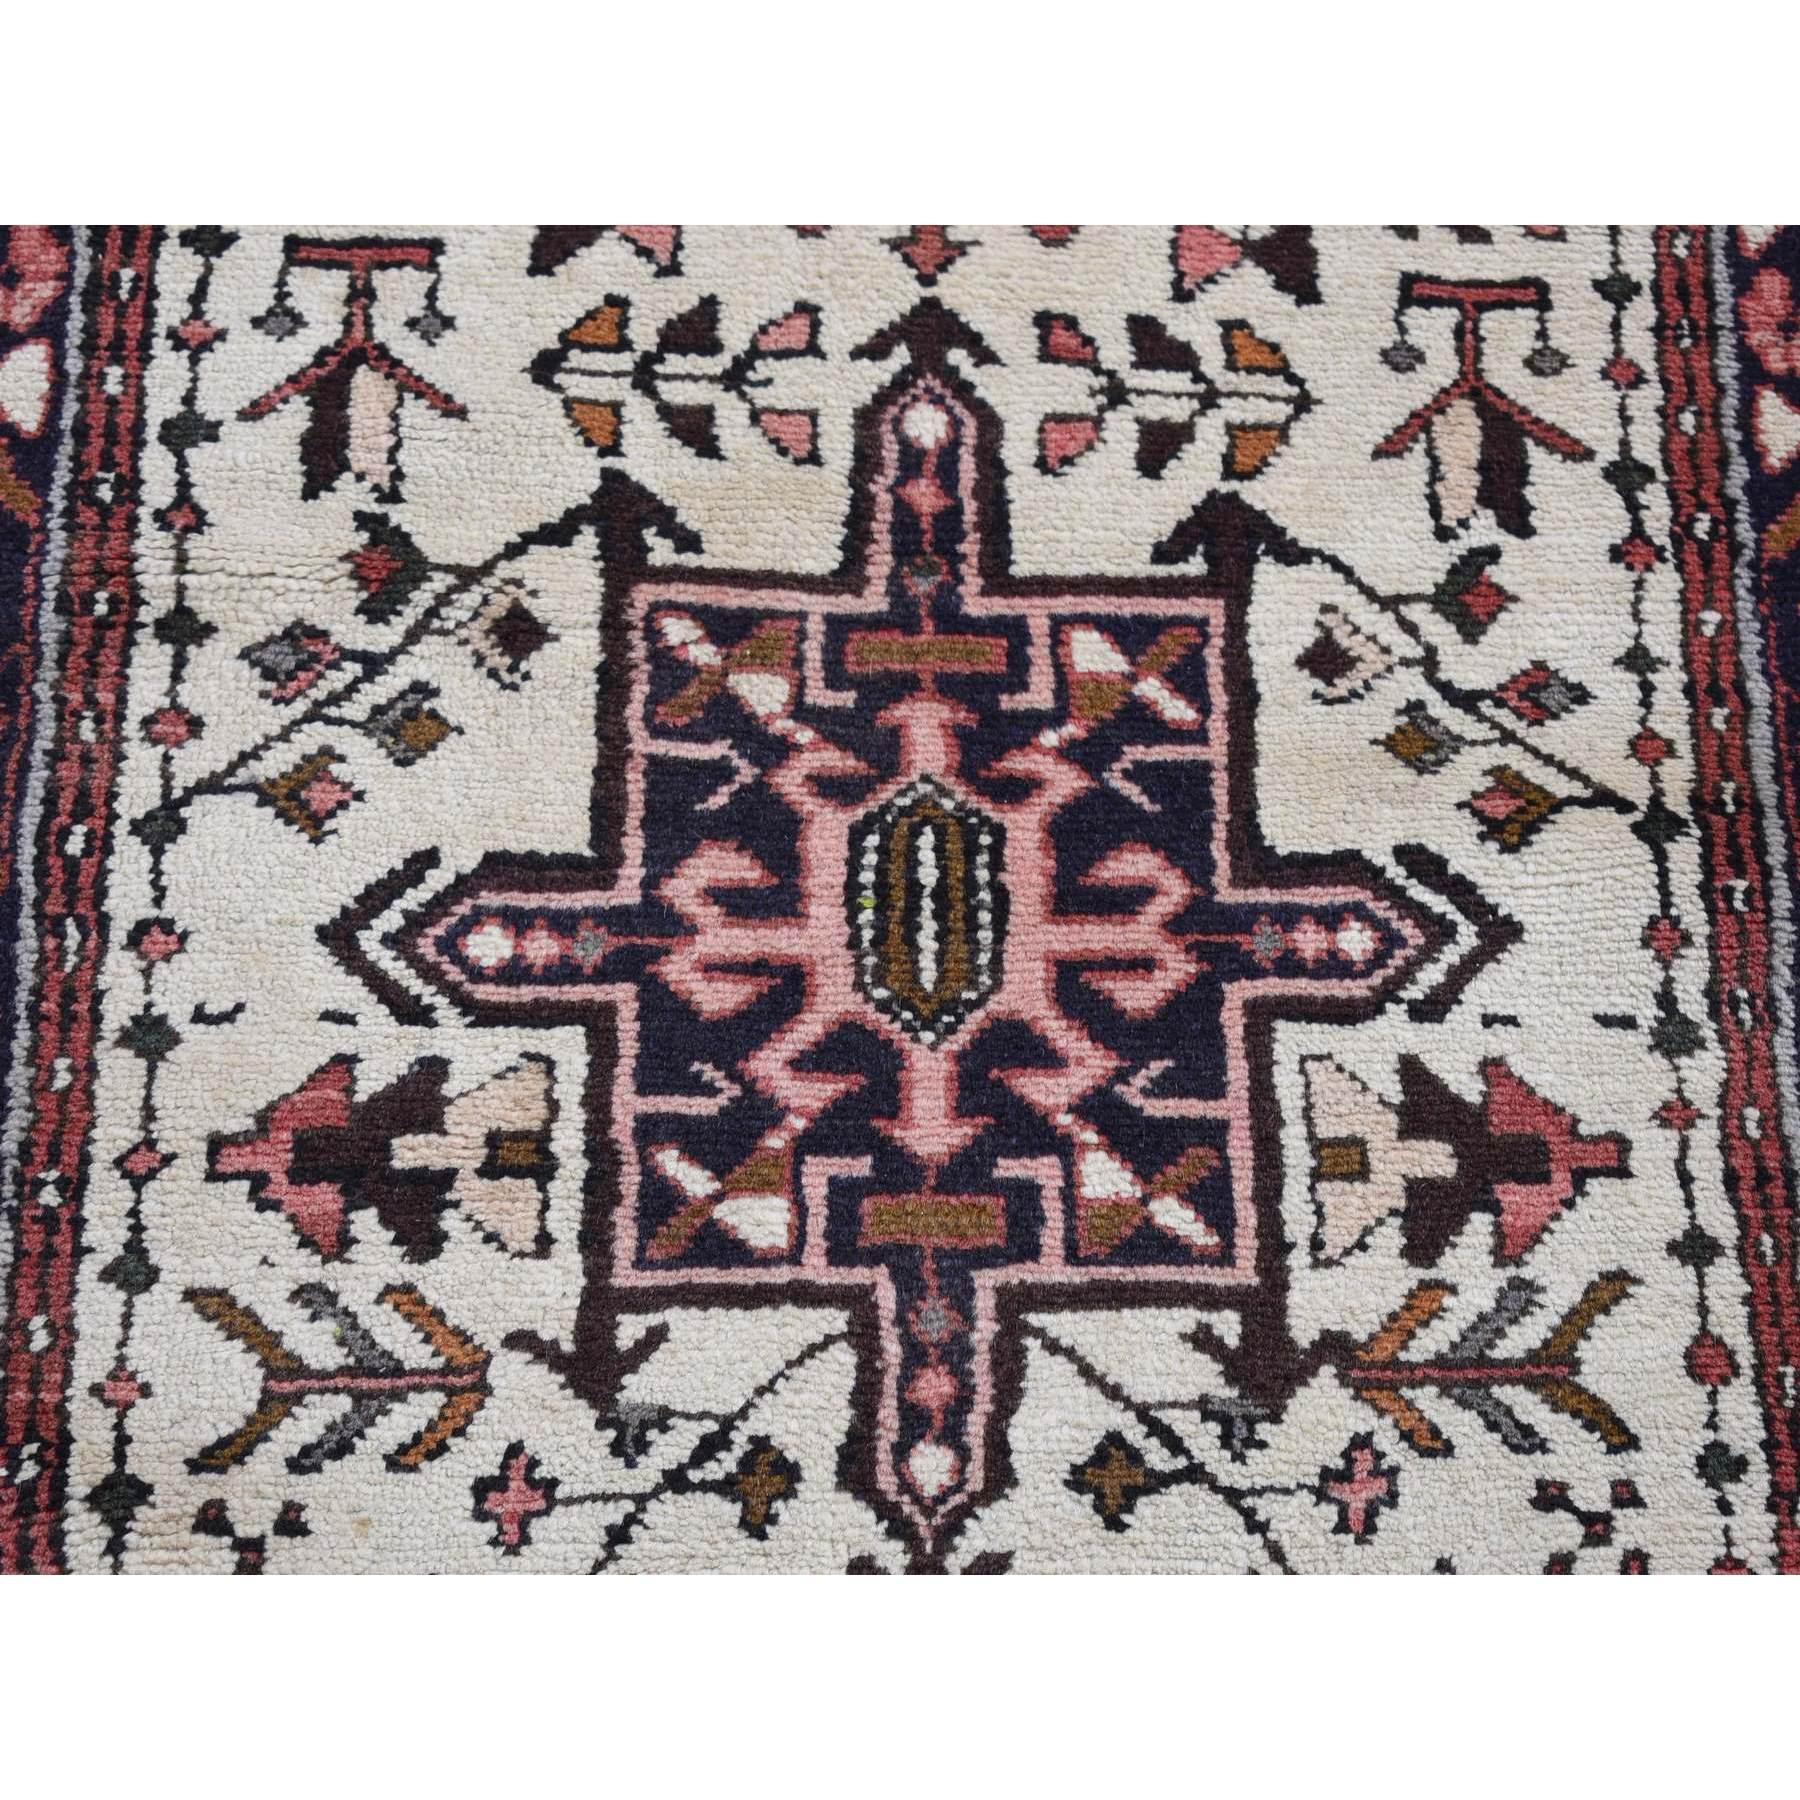 This fabulous Hand-Knotted carpet has been created and designed for extra strength and durability. This rug has been handcrafted for weeks in the traditional method that is used to make
Exact Rug Size in Feet and Inches : 2'4